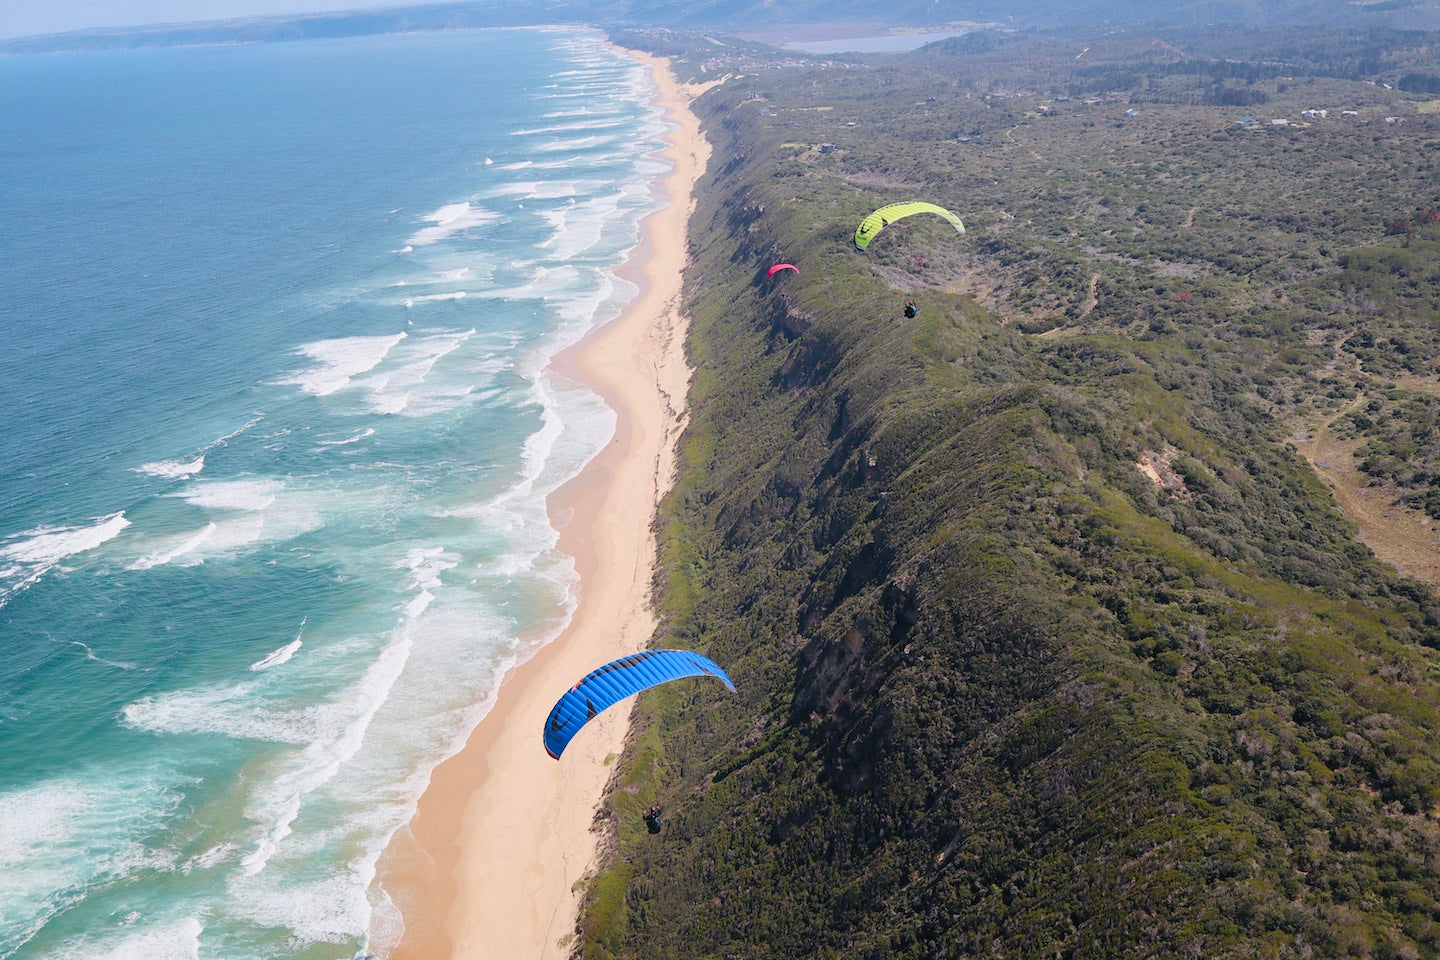 Two paraglider's soaring the coastline in Wilderness South Africa with epic beach and sea view